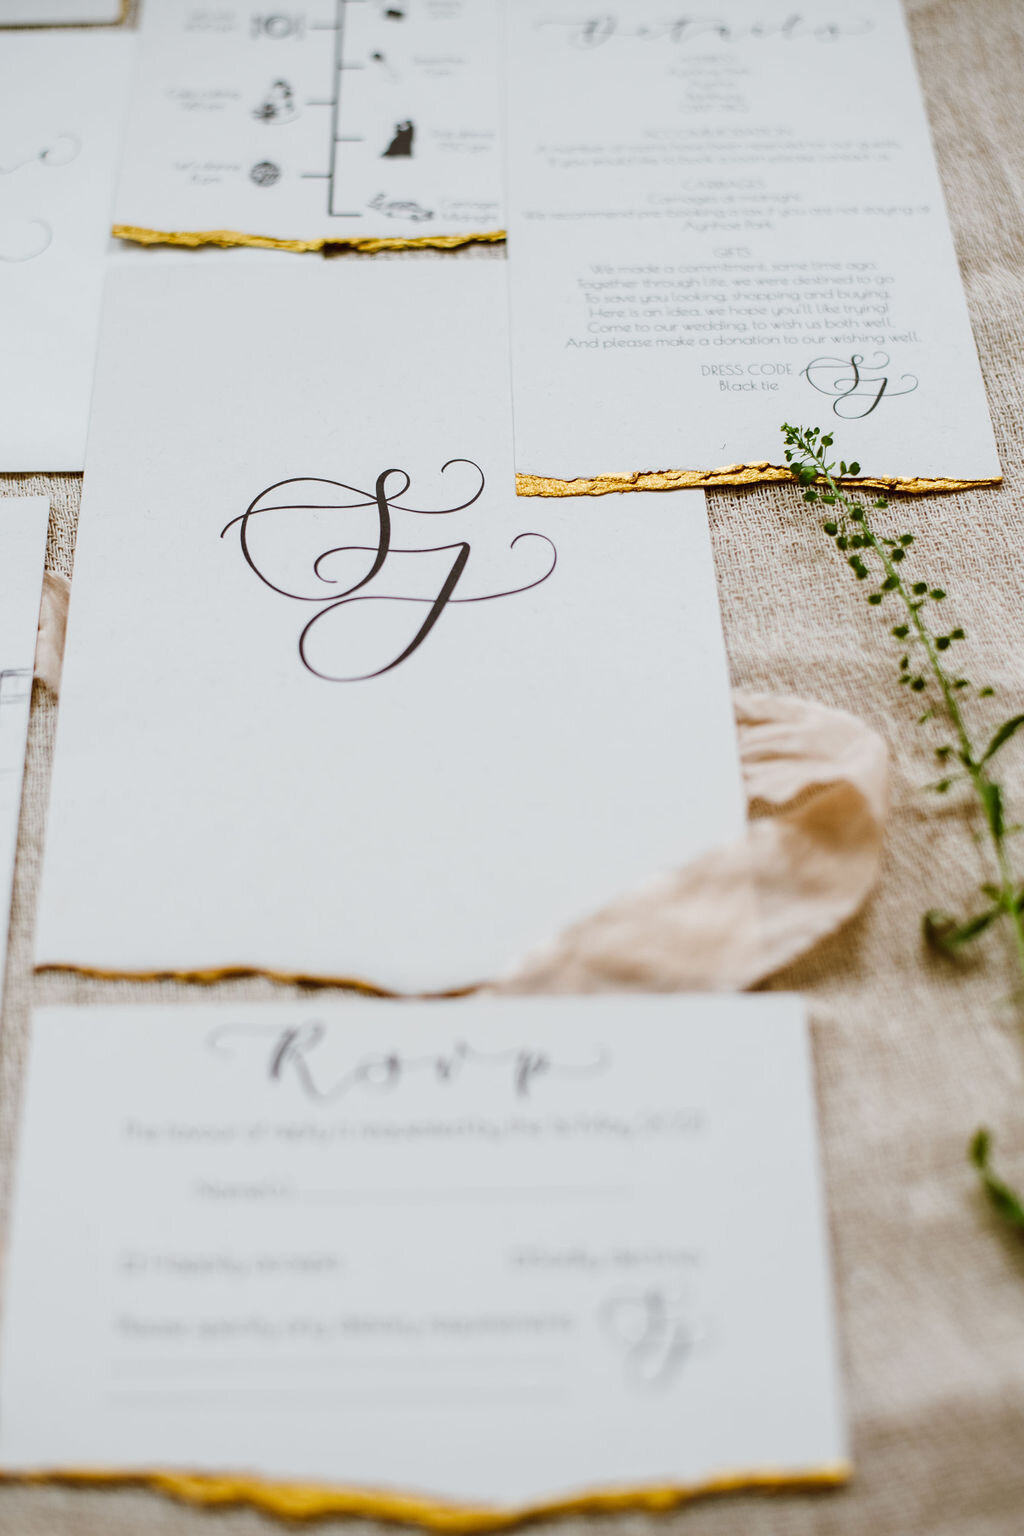 Monochrome Aynhoe Park invitation suite printed on recycled paper with gold details by The Amyverse calligraphy monogram.jpg